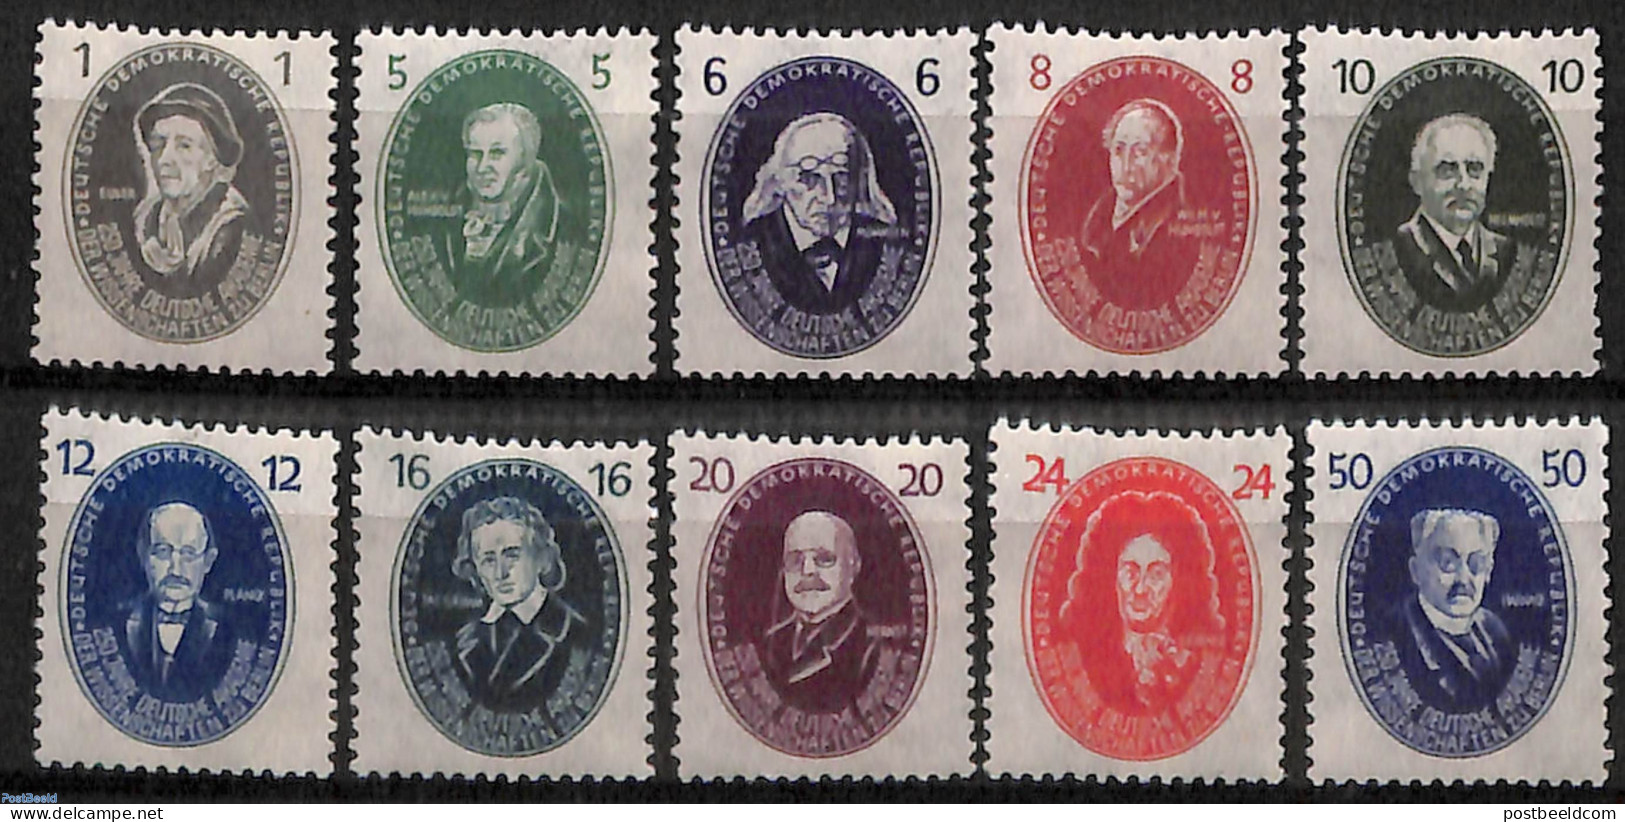 Germany, DDR 1950 Famous Persons 10v, Mint NH, History - Science - Nobel Prize Winners - Computers & IT - Physicians - Neufs